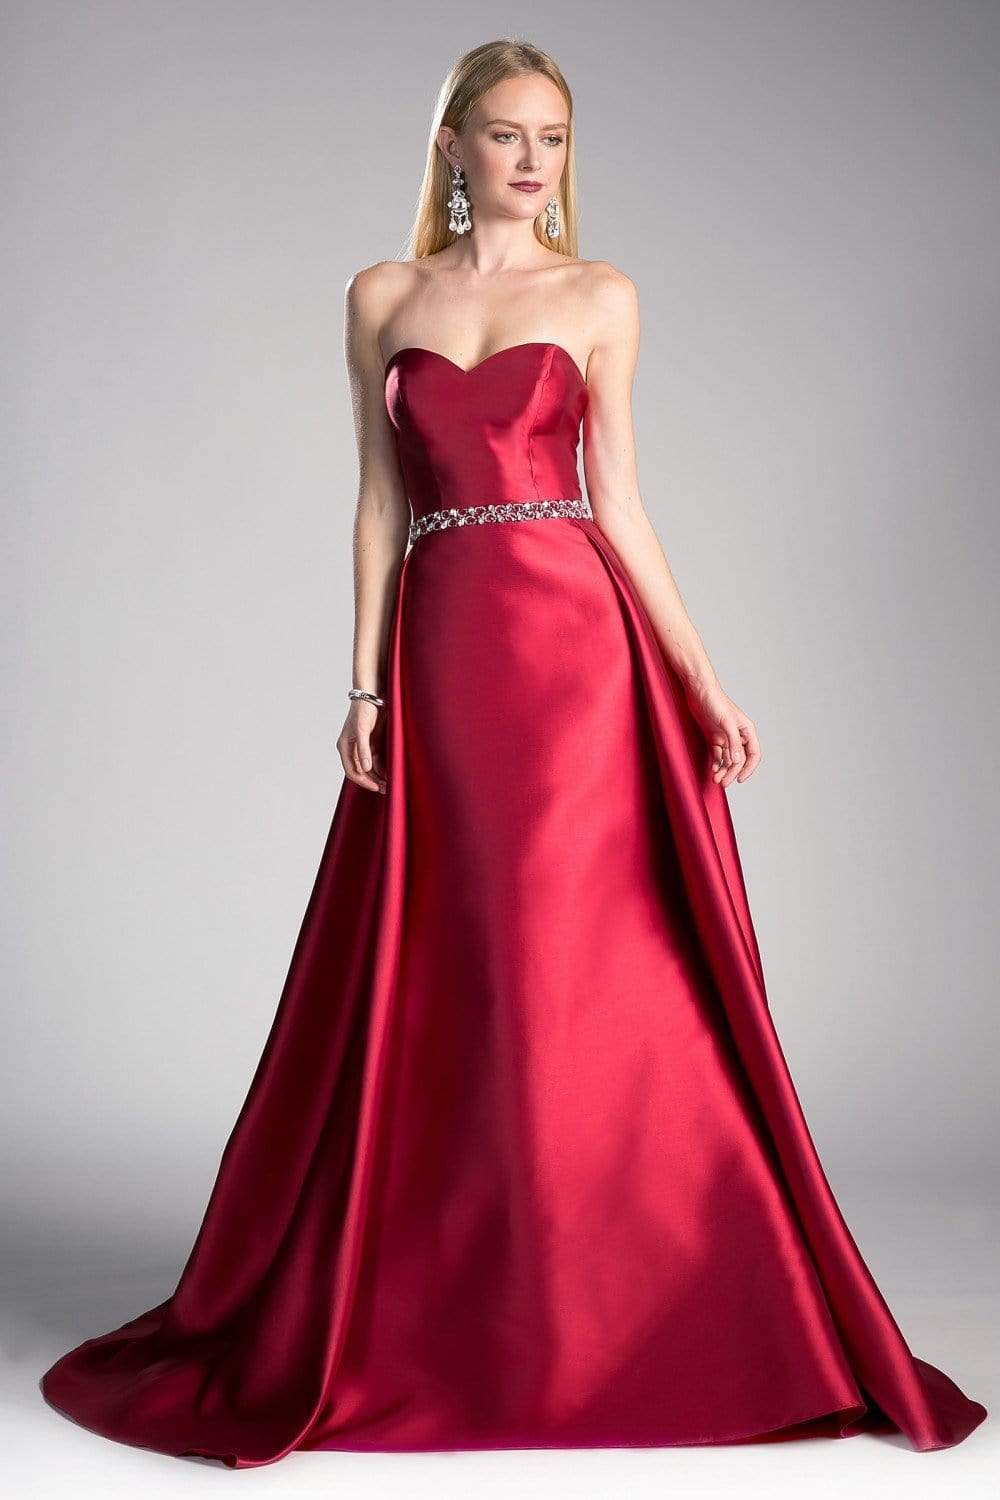 Cinderella Divine - 455 Beaded Belt Strapless Silk Gown with Overskirt Special Occasion Dress 2 / Burgundy